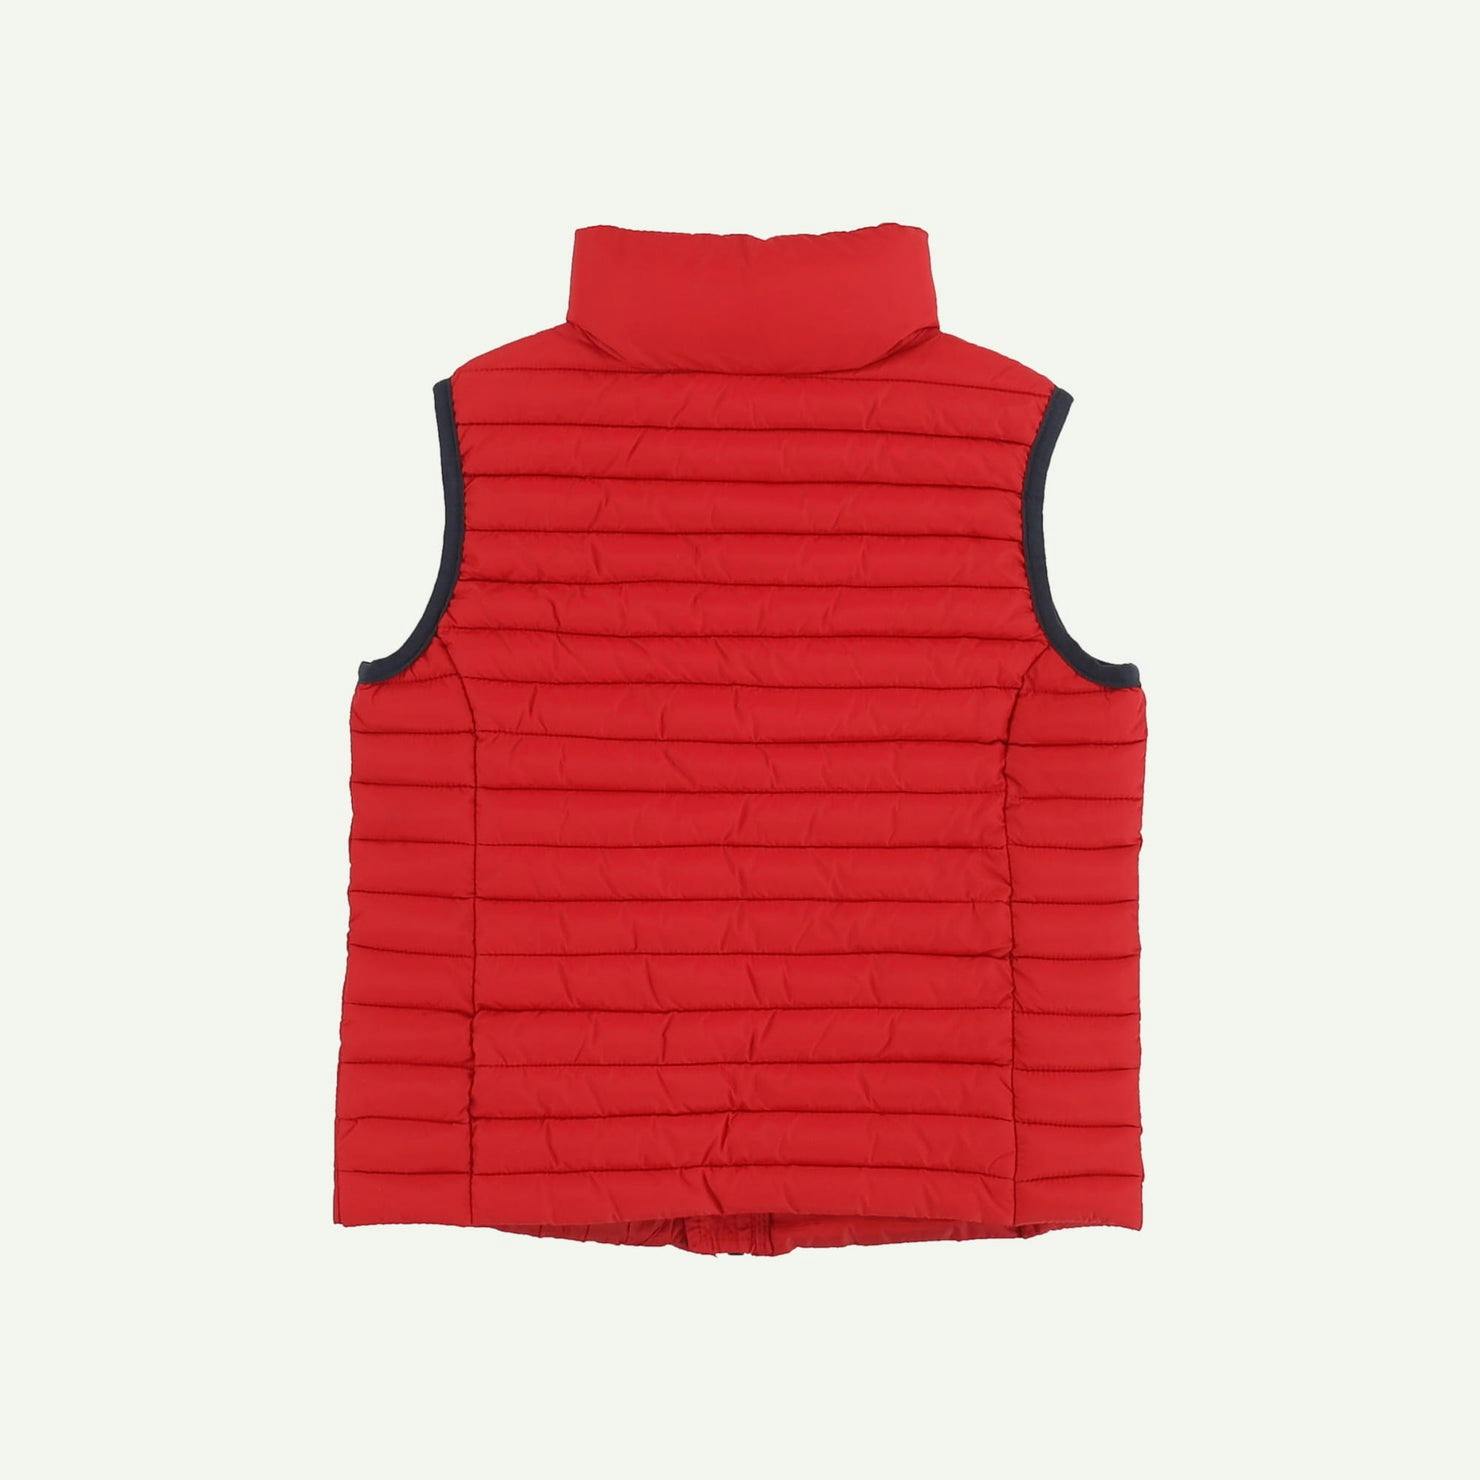 Joules As new Red Gilet